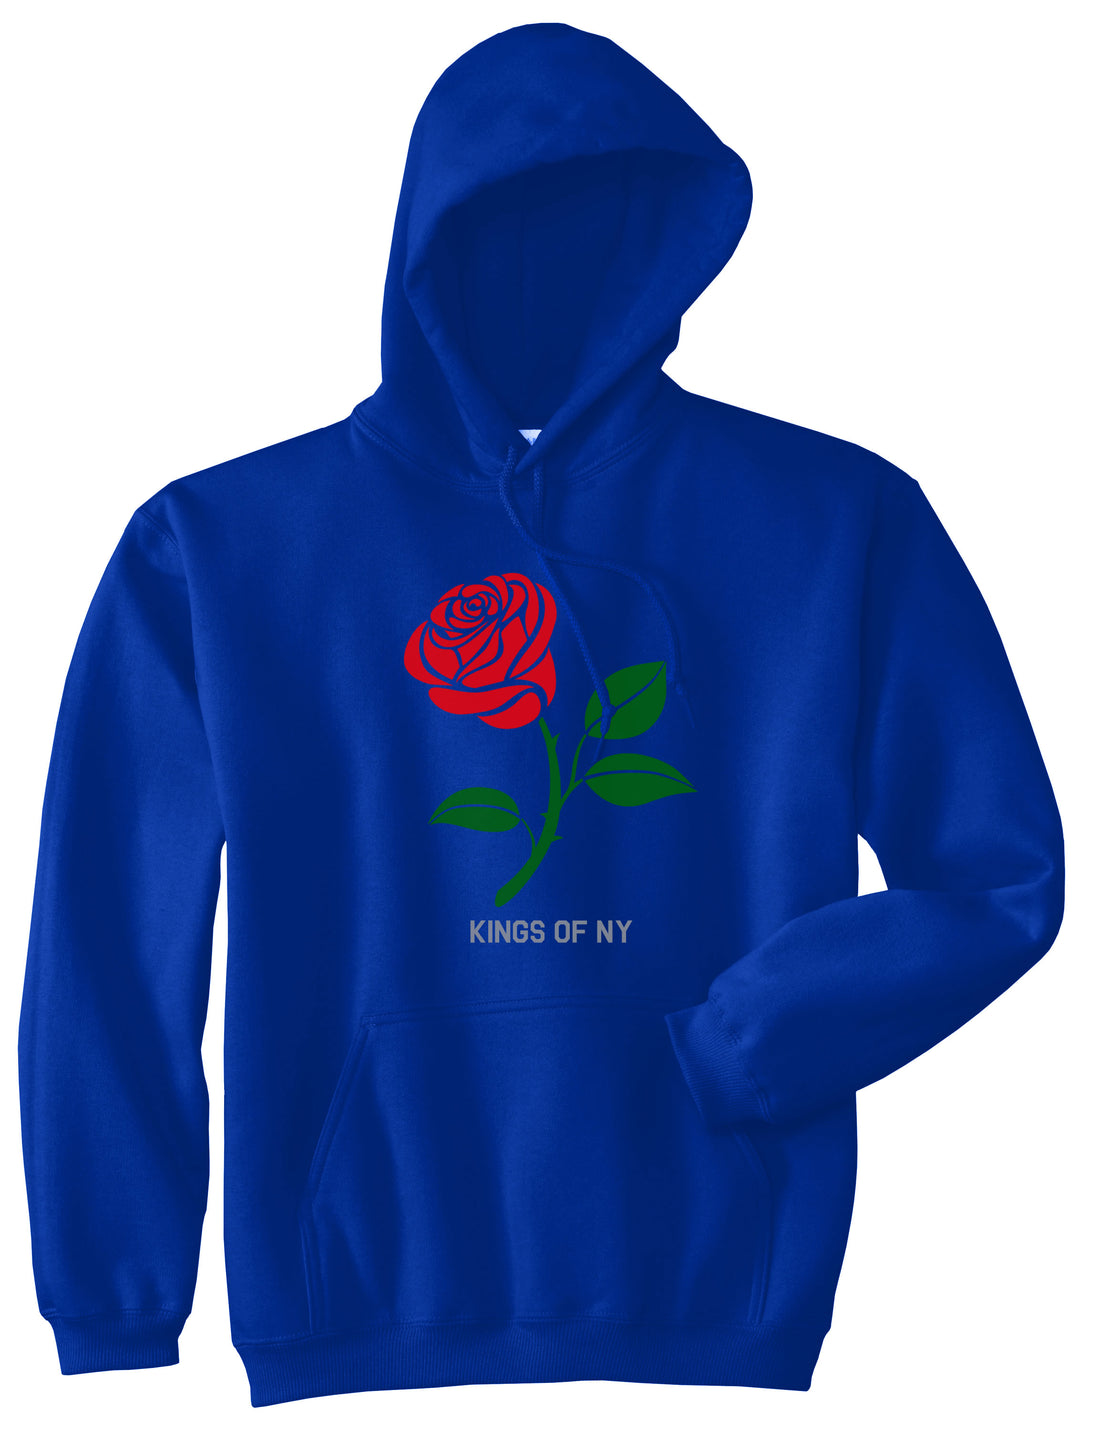 Single Red Rose Mens Pullover Hoodie Royal Blue By Kings Of NY